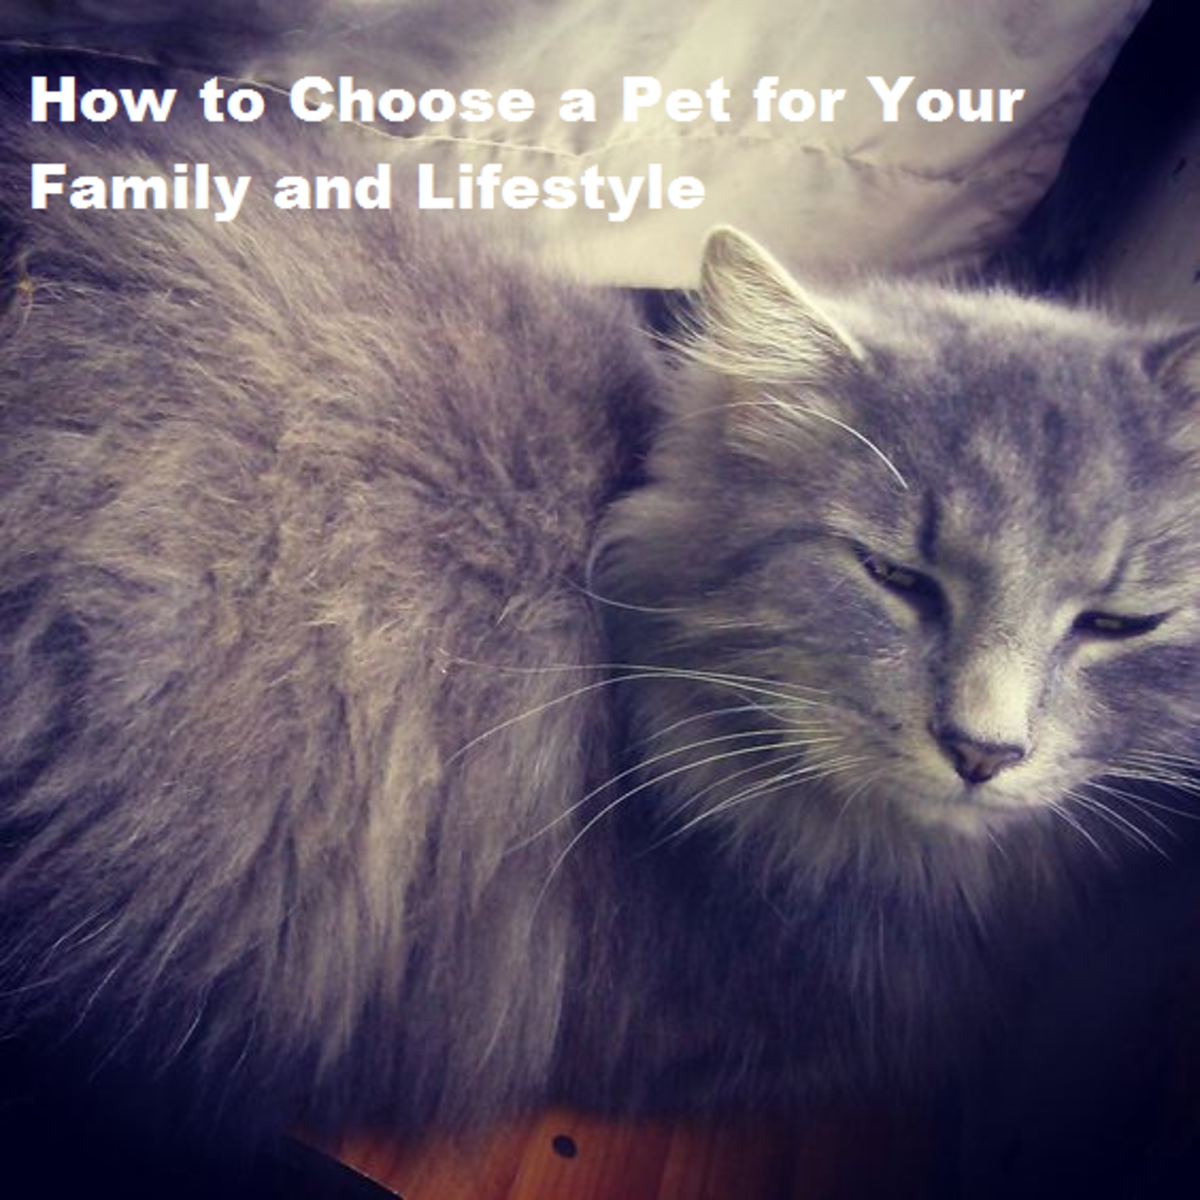 The best pet owners take time to choose the right pet for their family and lifestyles. 